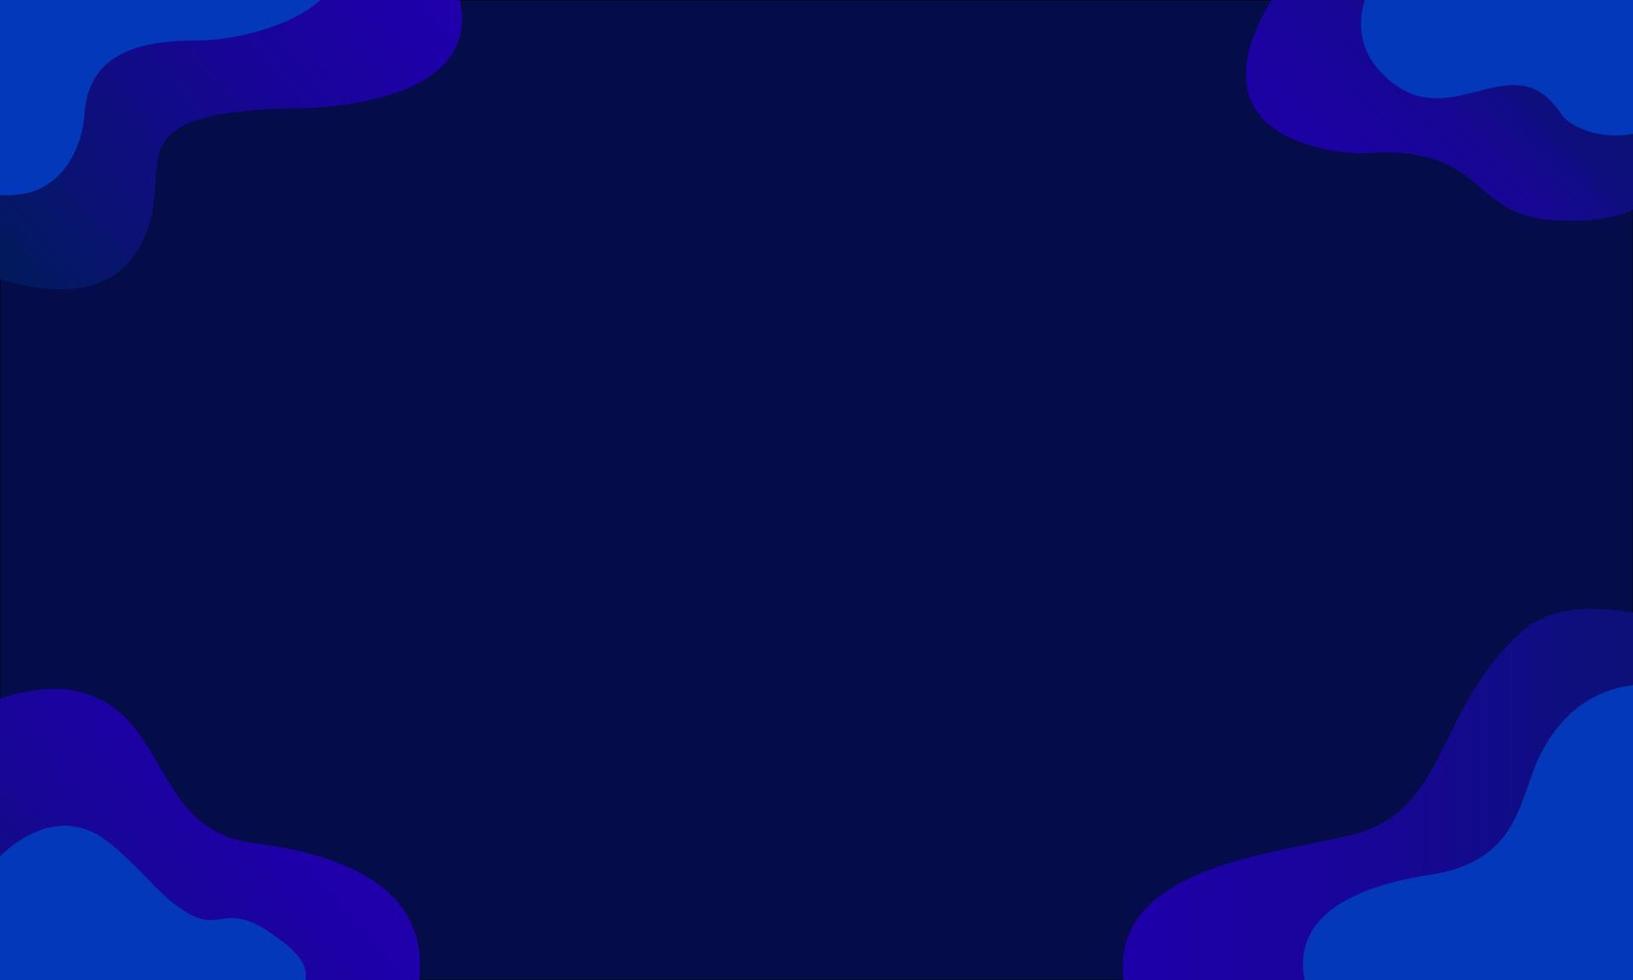 Blue Abstrack Background modern style vector. vector